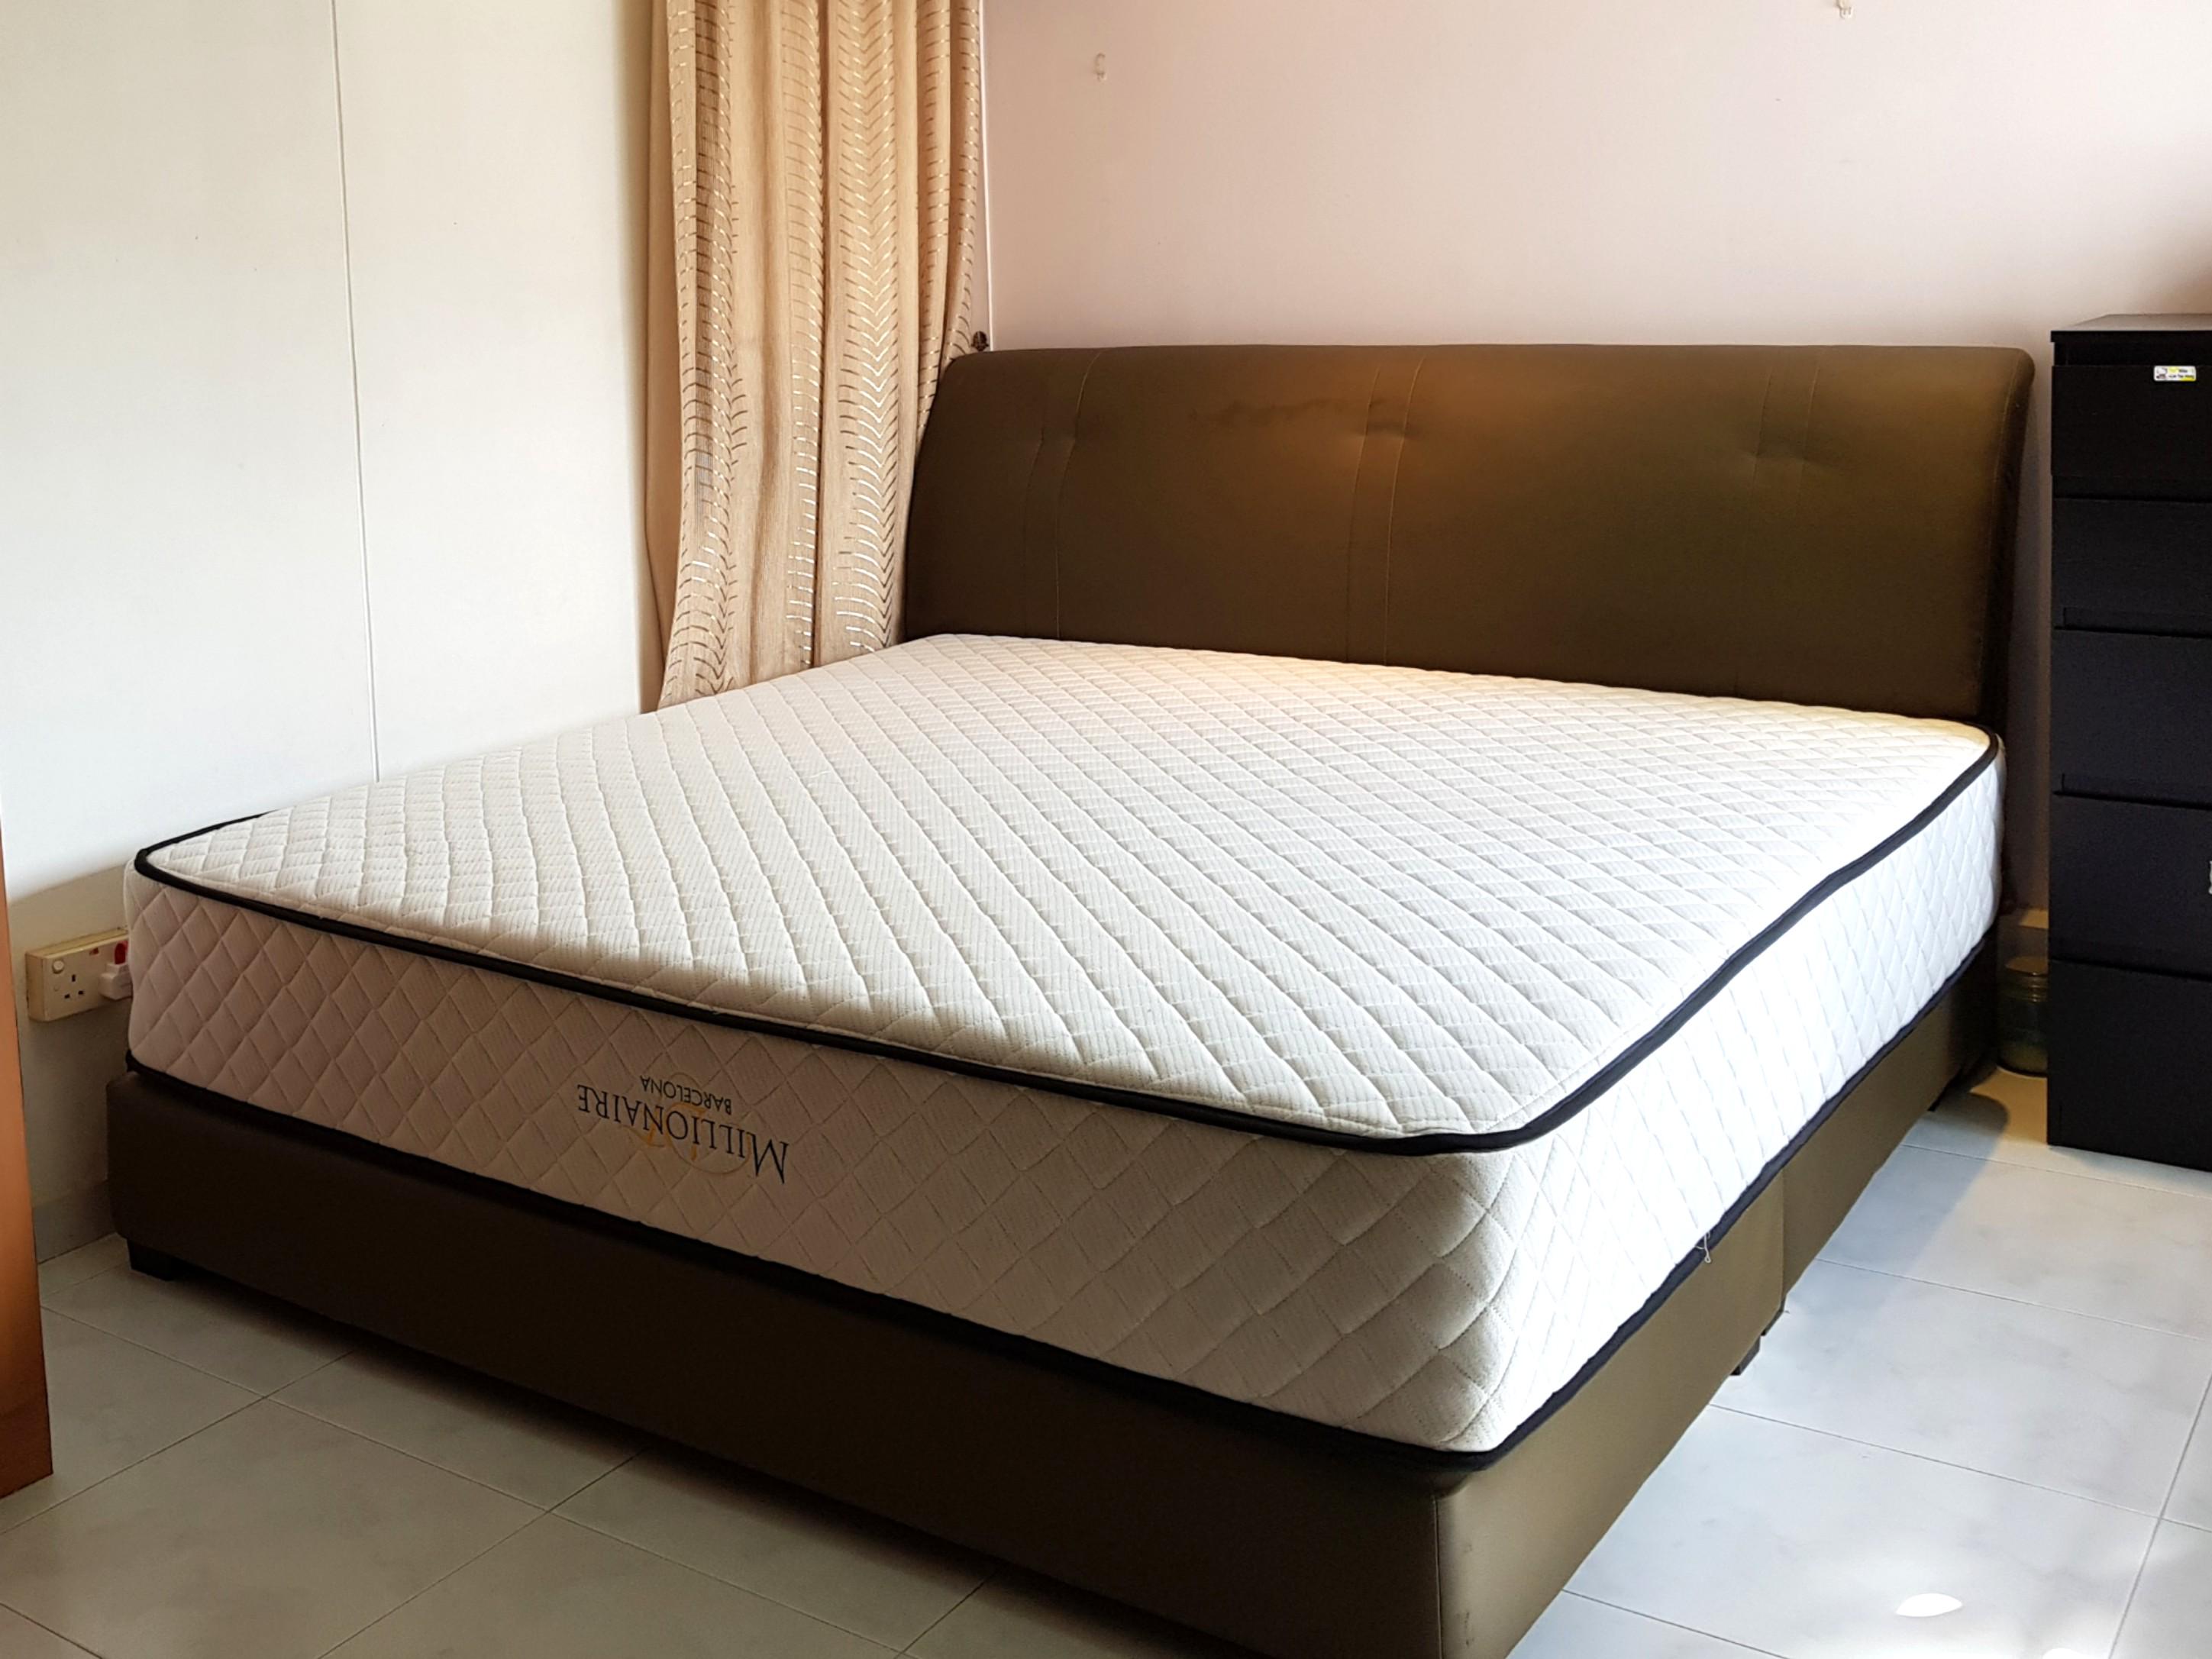 King Size Bed With Or Without Frame, King Size Beds With Mattress Included